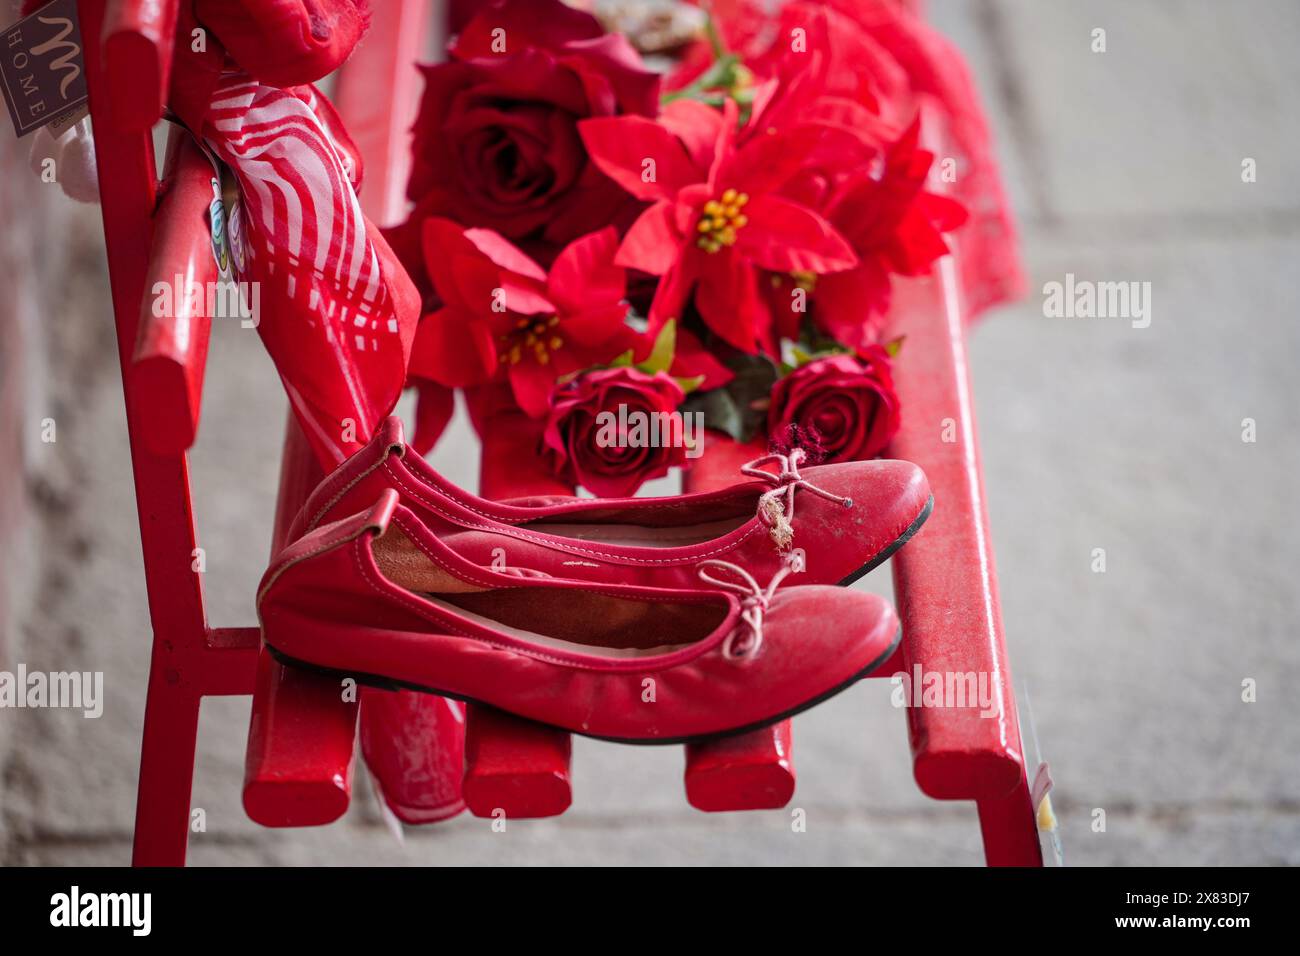 Red shoes on bench against violence against women Stock Photo